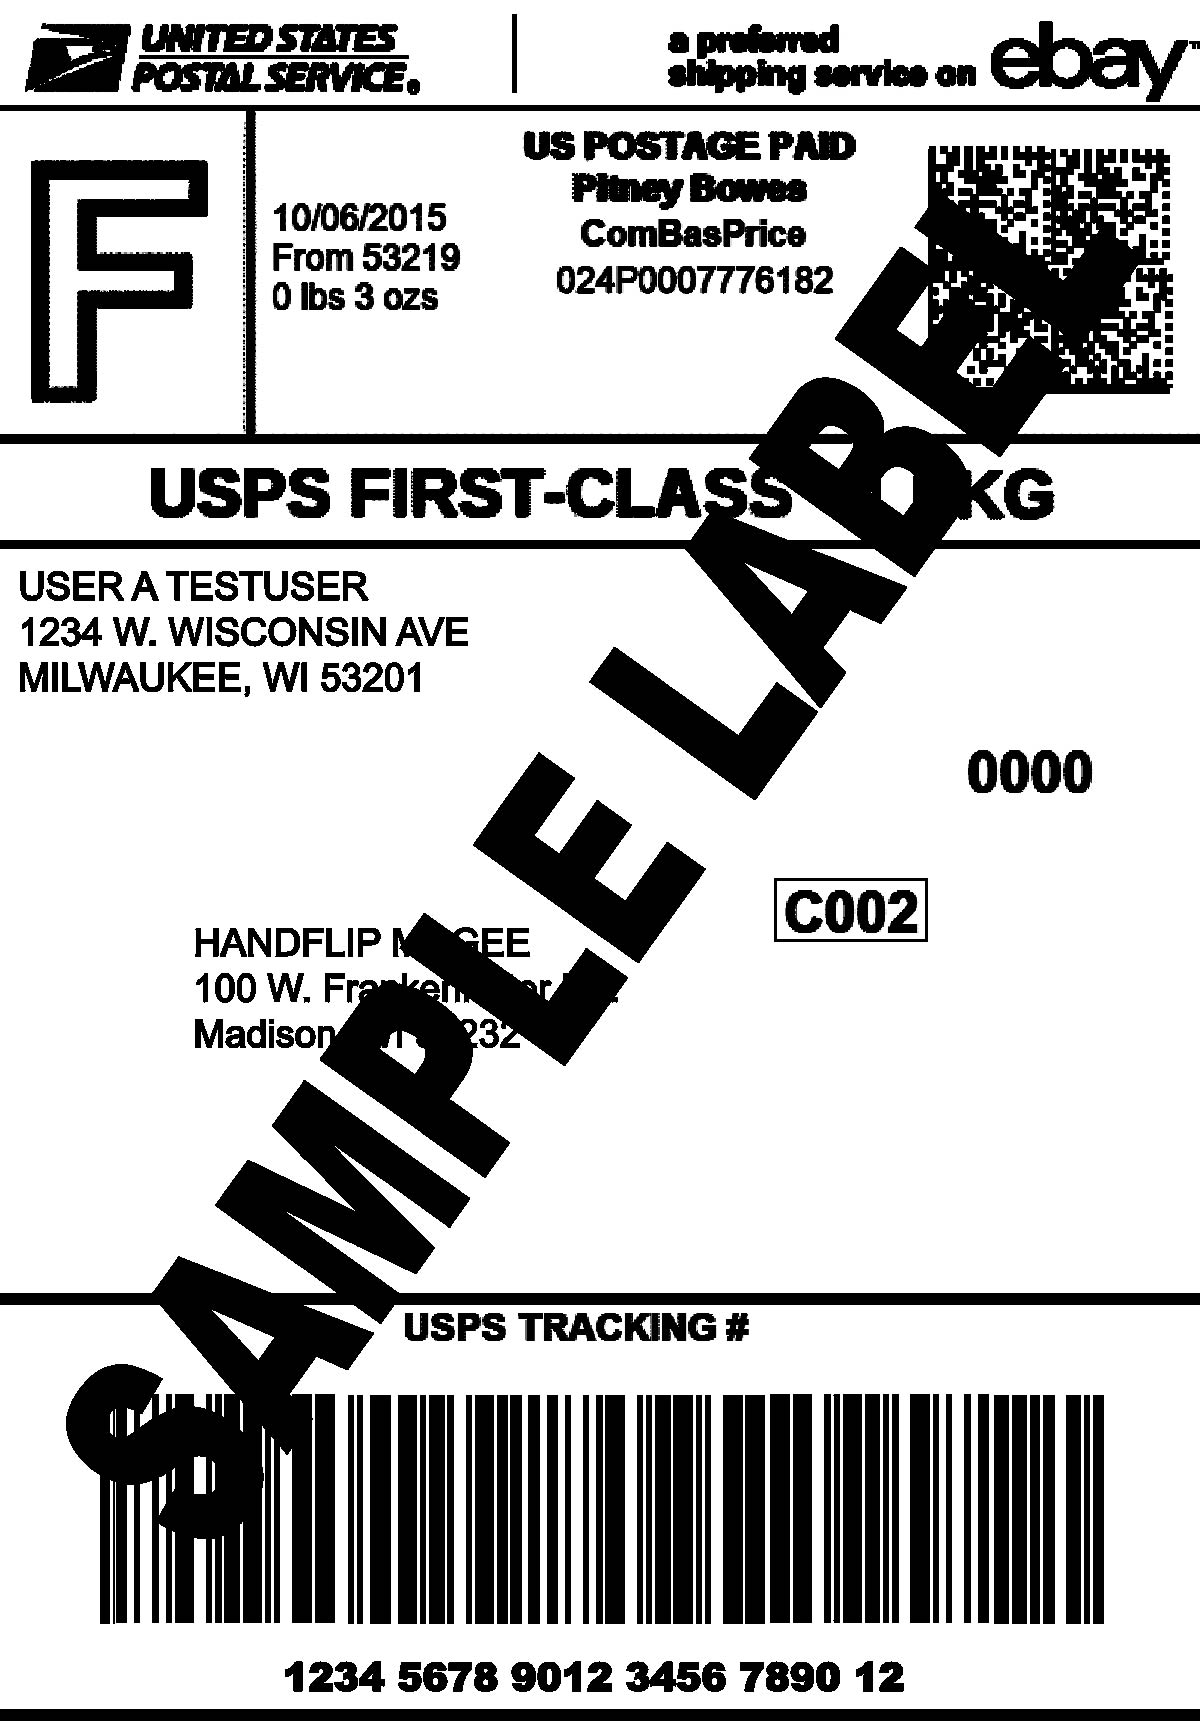 Thermal Printer Test - Shipping Label - Too Heavy